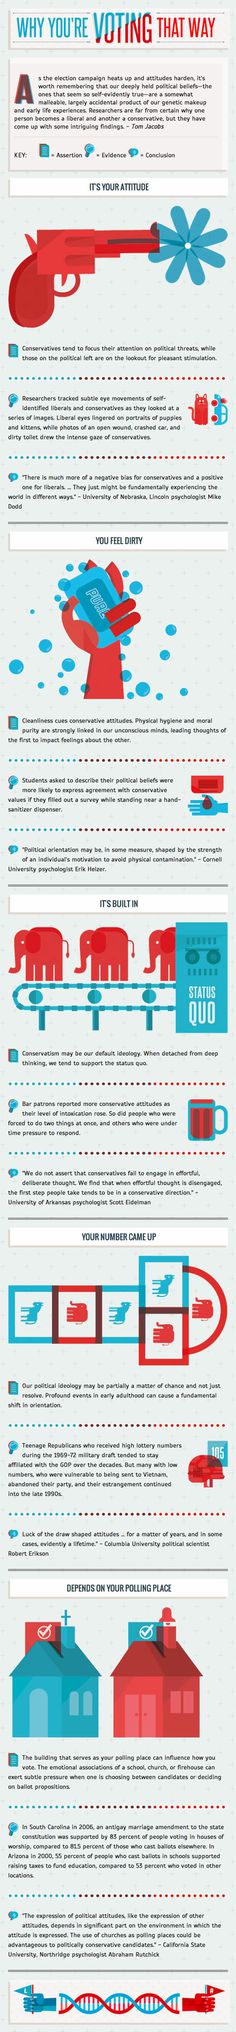 why you're voting that way #politics #infographic